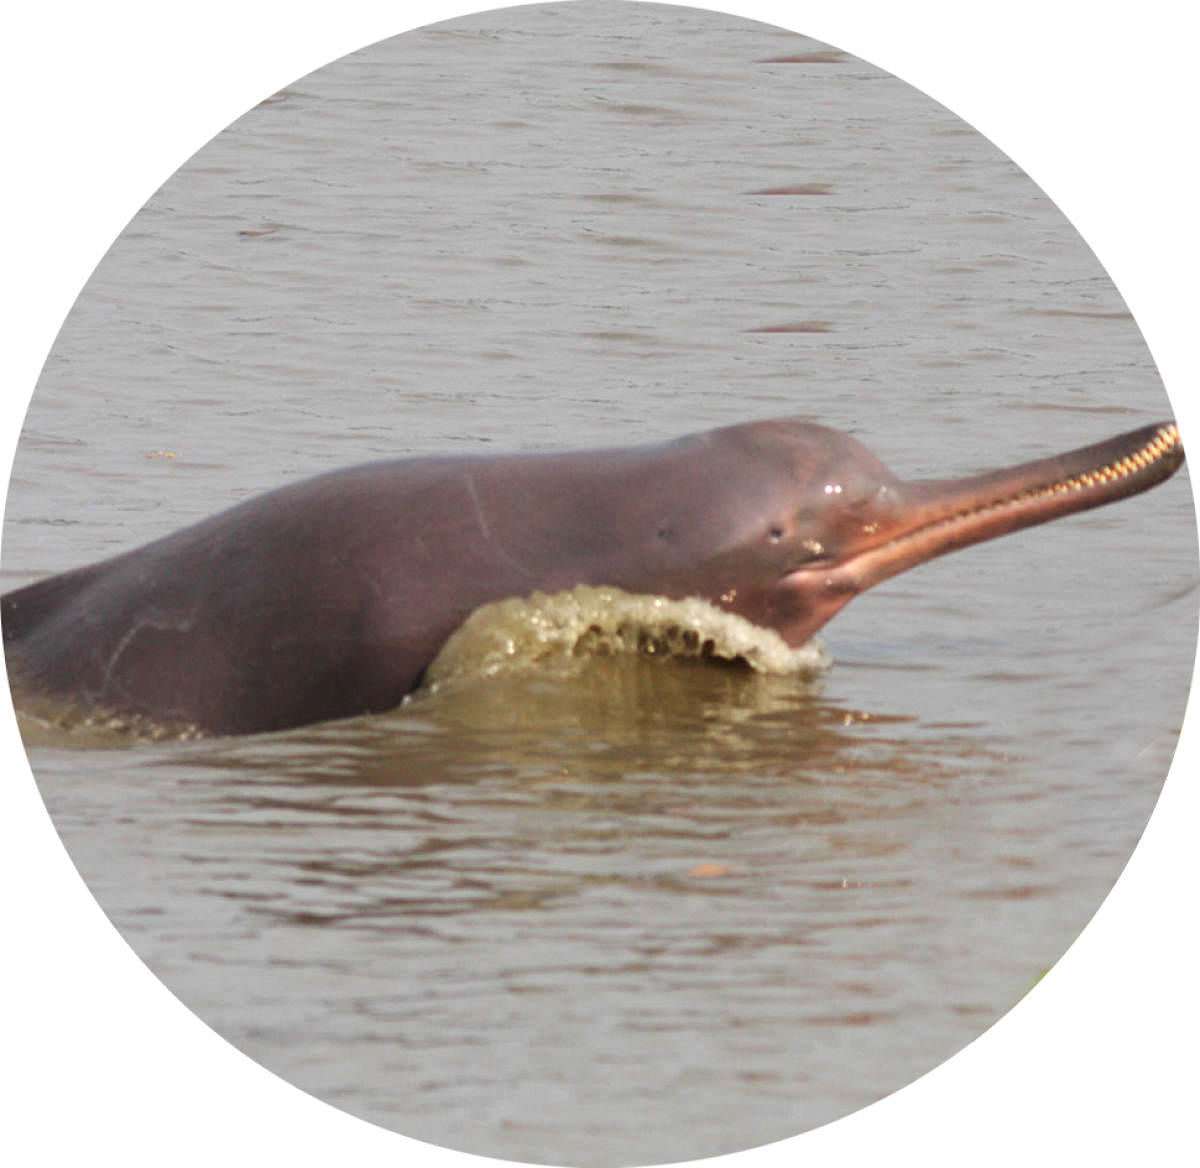 South Asian river dolphin (Platanista gangetica)  One of the subspecies, the Ganges river dolphin, is India’s national aquatic animal. In 2020, the ‘Project Dolphin’ was launched by the government to protect these endangered dolphins.